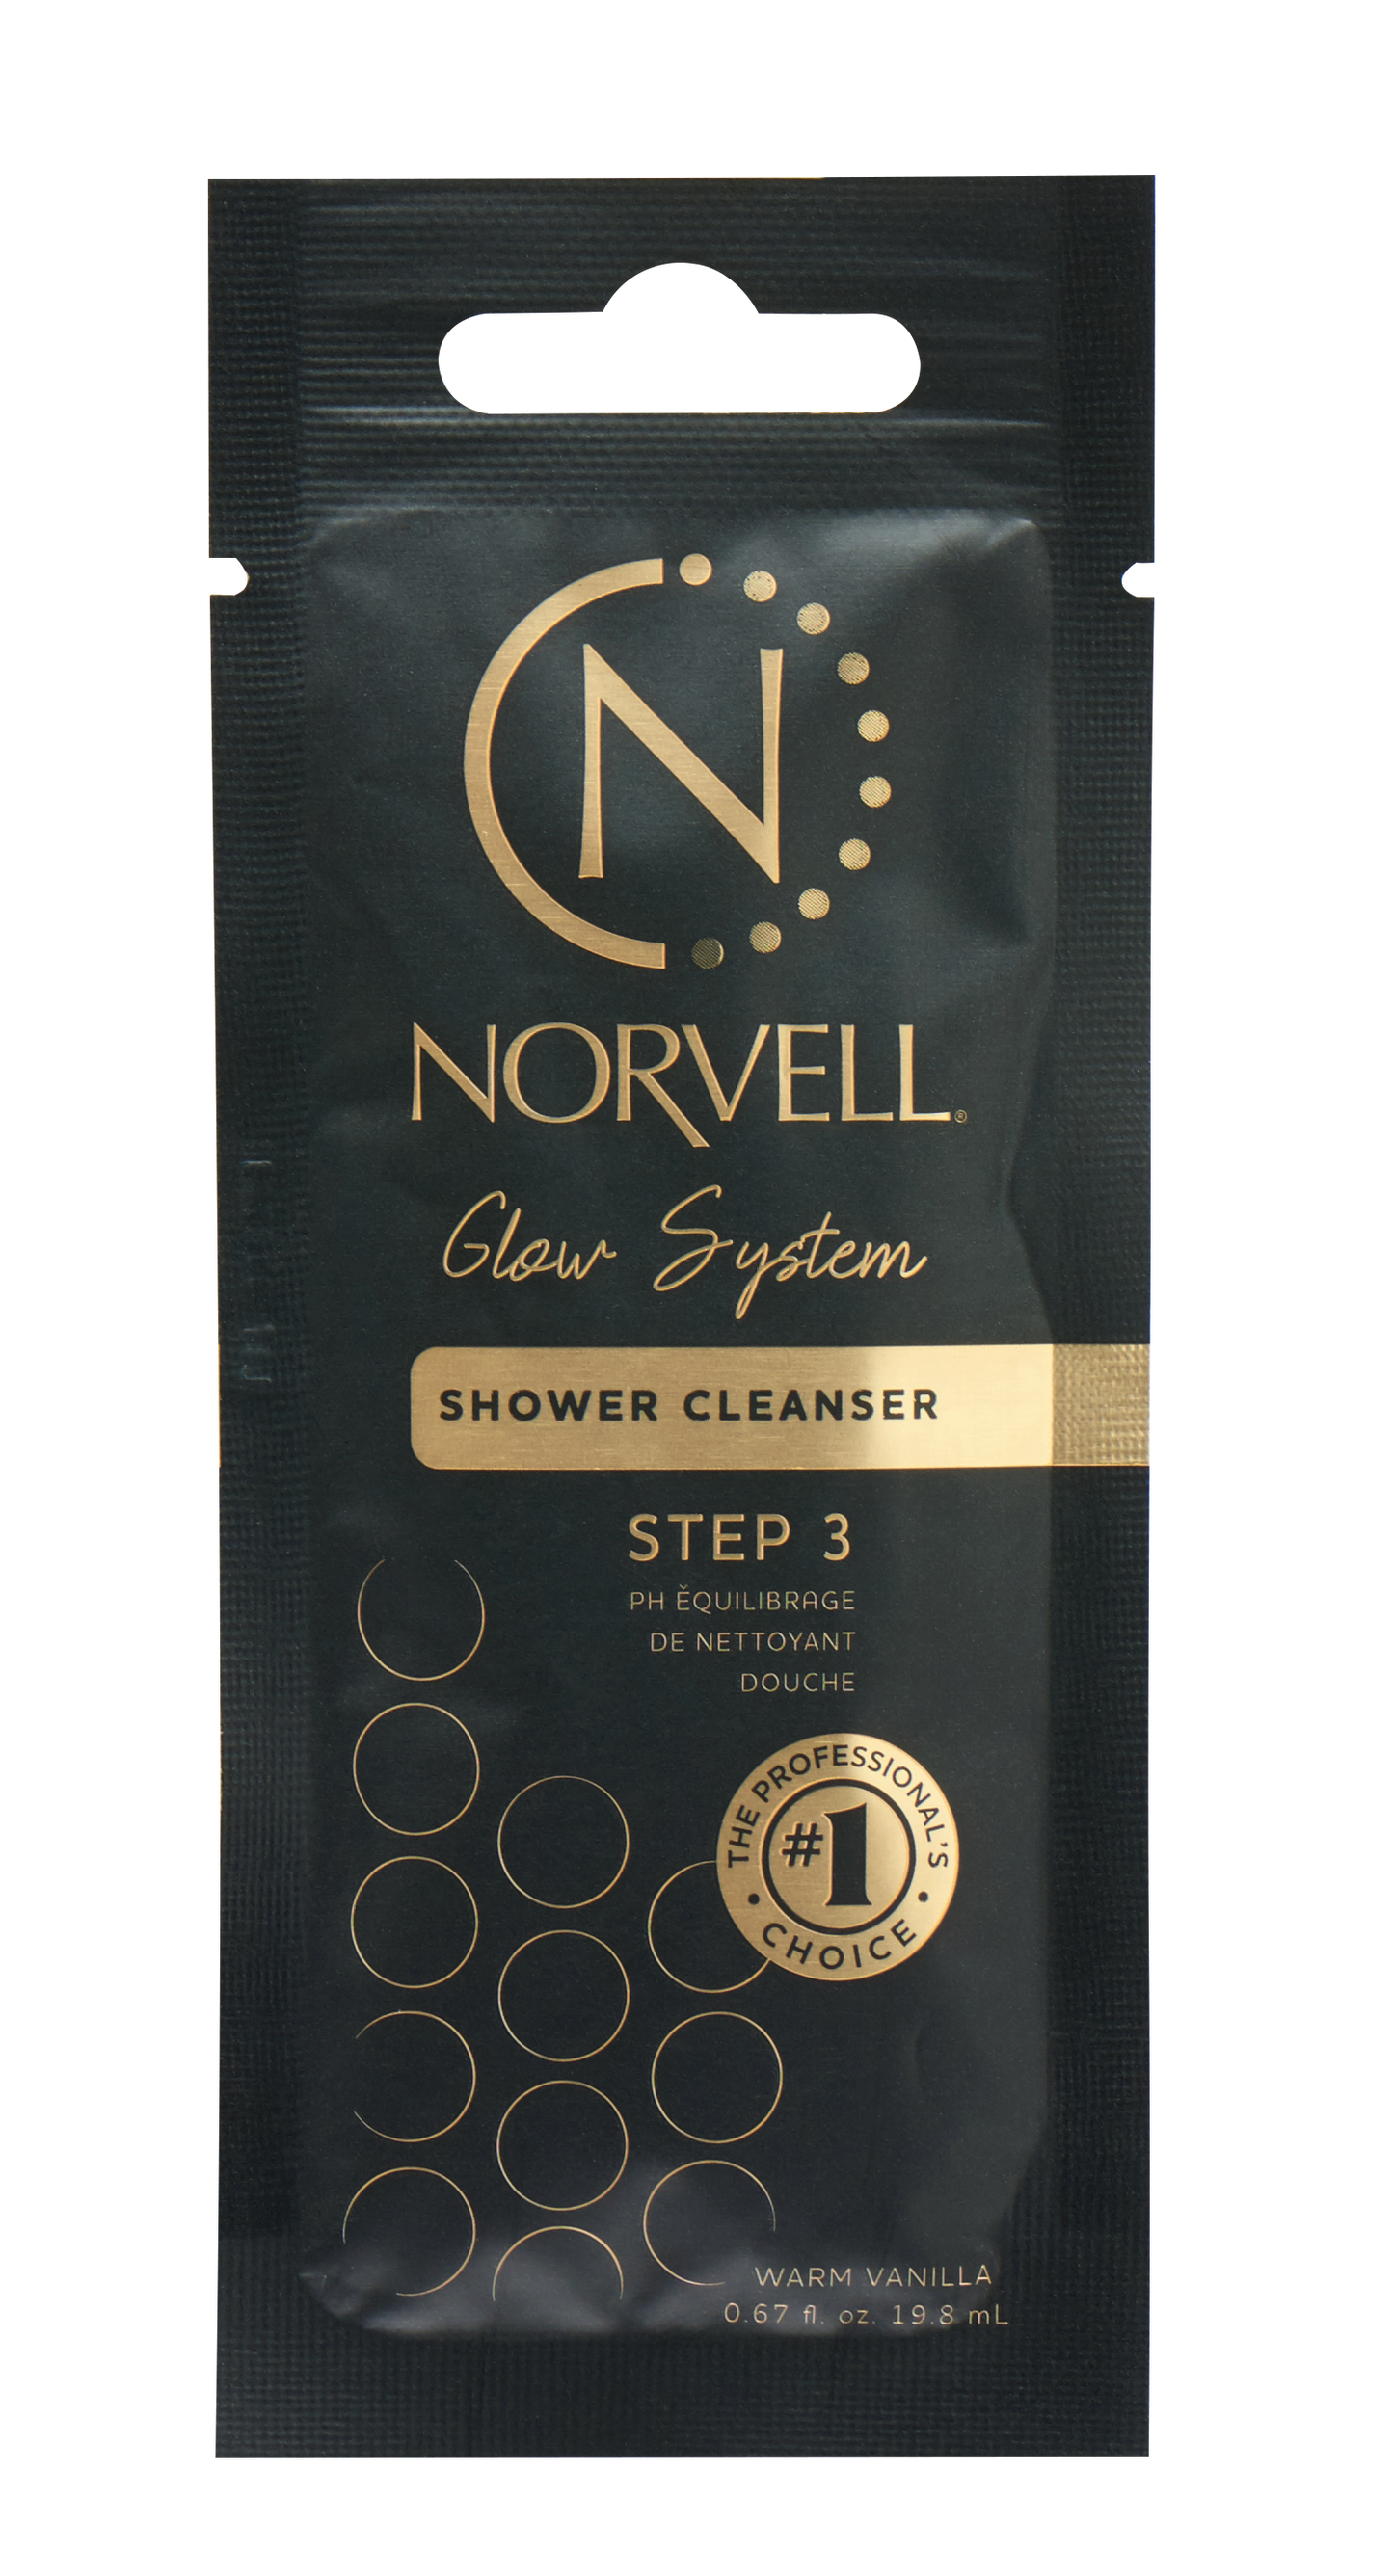 Norvell Glow System Post-Tan Shower Cleanser